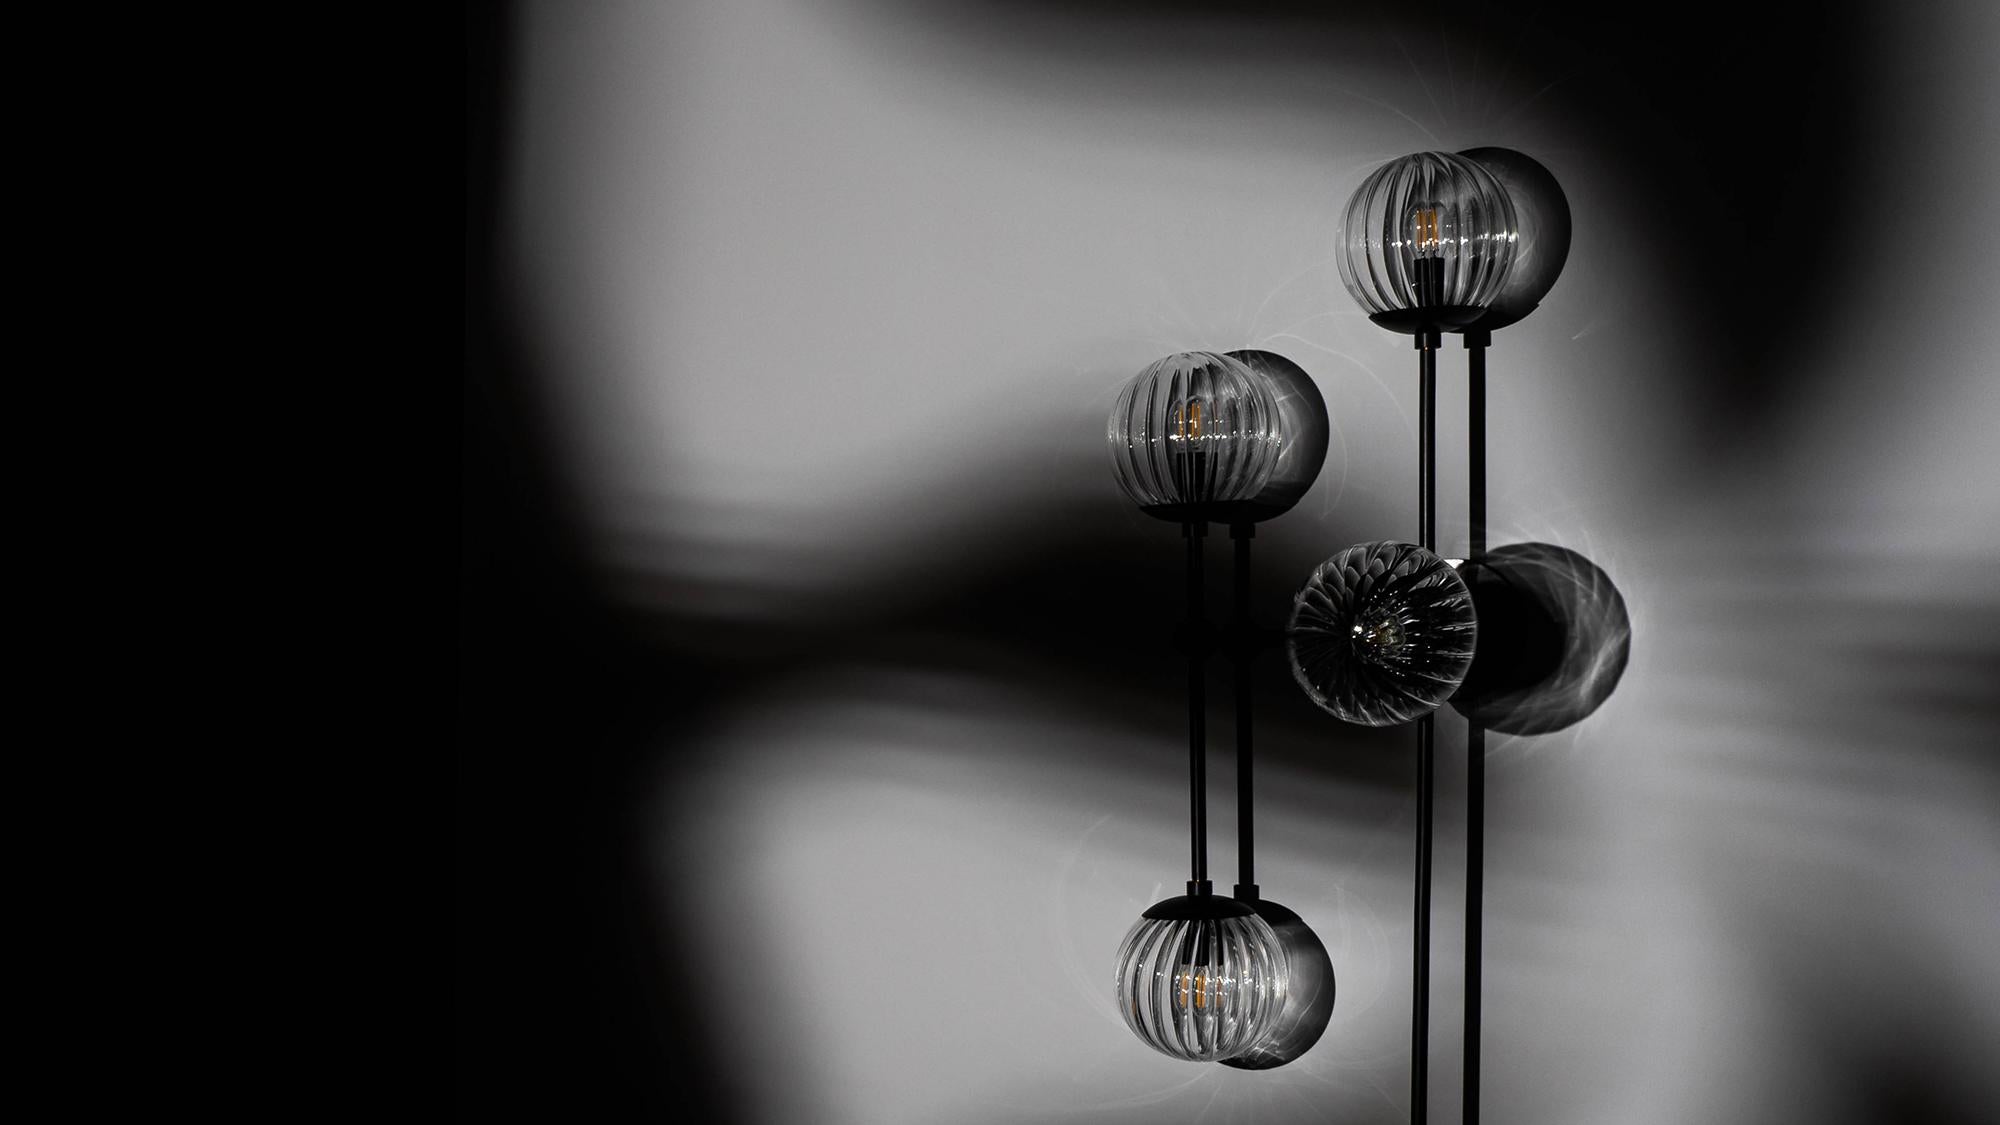 Armstrong 6 captures a sense of movement. Forms connect with spontaneous energy, punctuated by glass spheres. Linear elements complement the carefully crafted brass, echoing a reinforced internal skeleton. The flush mount base gives this lamp